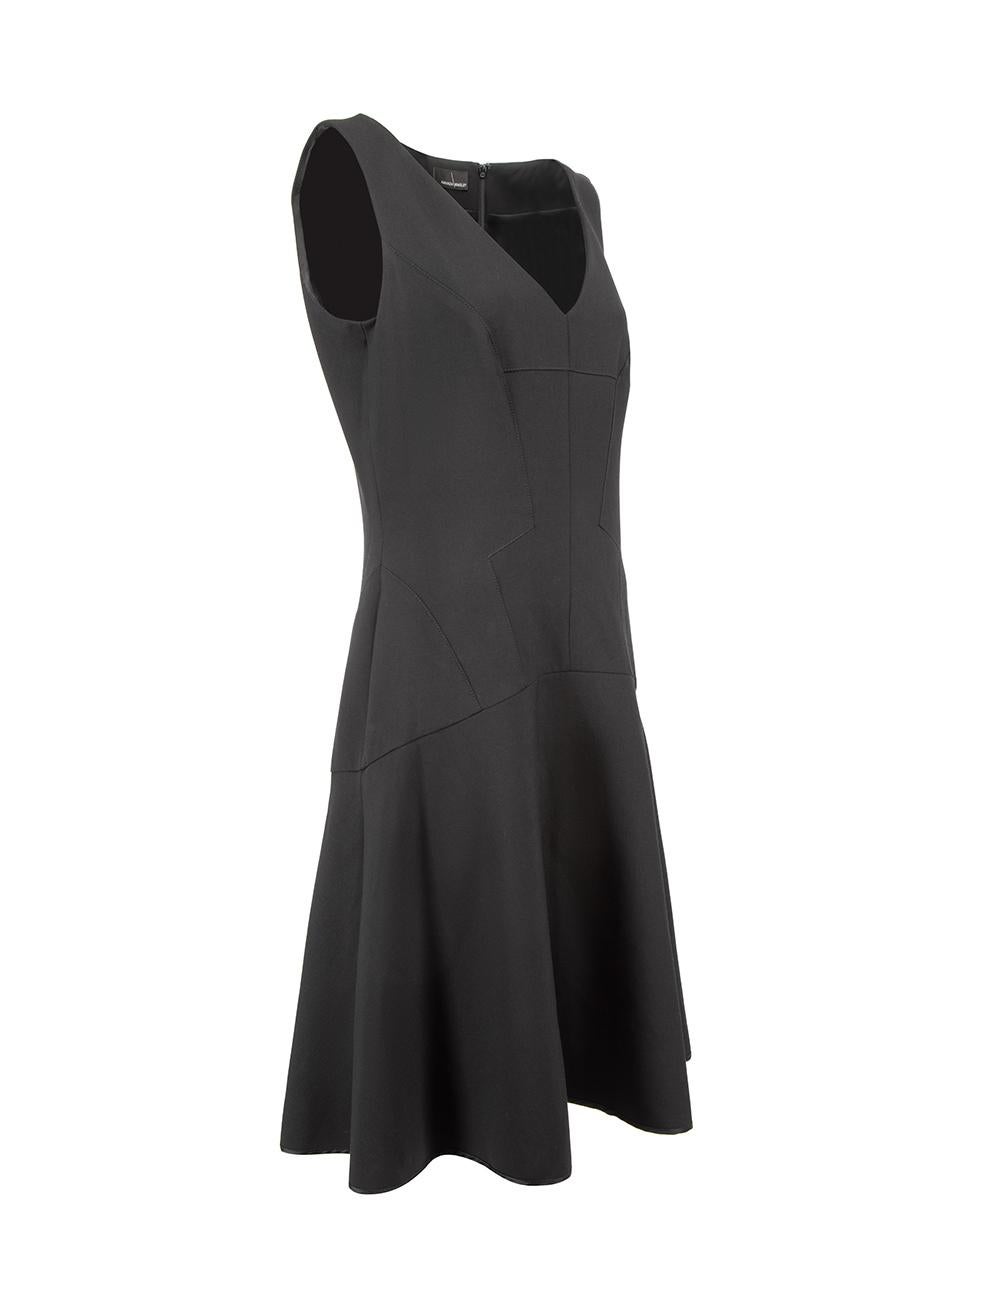 CONDITION is Very good. Hardly any visible wear to dress is evident on this used Amanda Wakeley designer resale item.



Details


Black

Polyester

Midi dress

V neckline

Flared skirt

Back zip closure with hook and eye





Made in